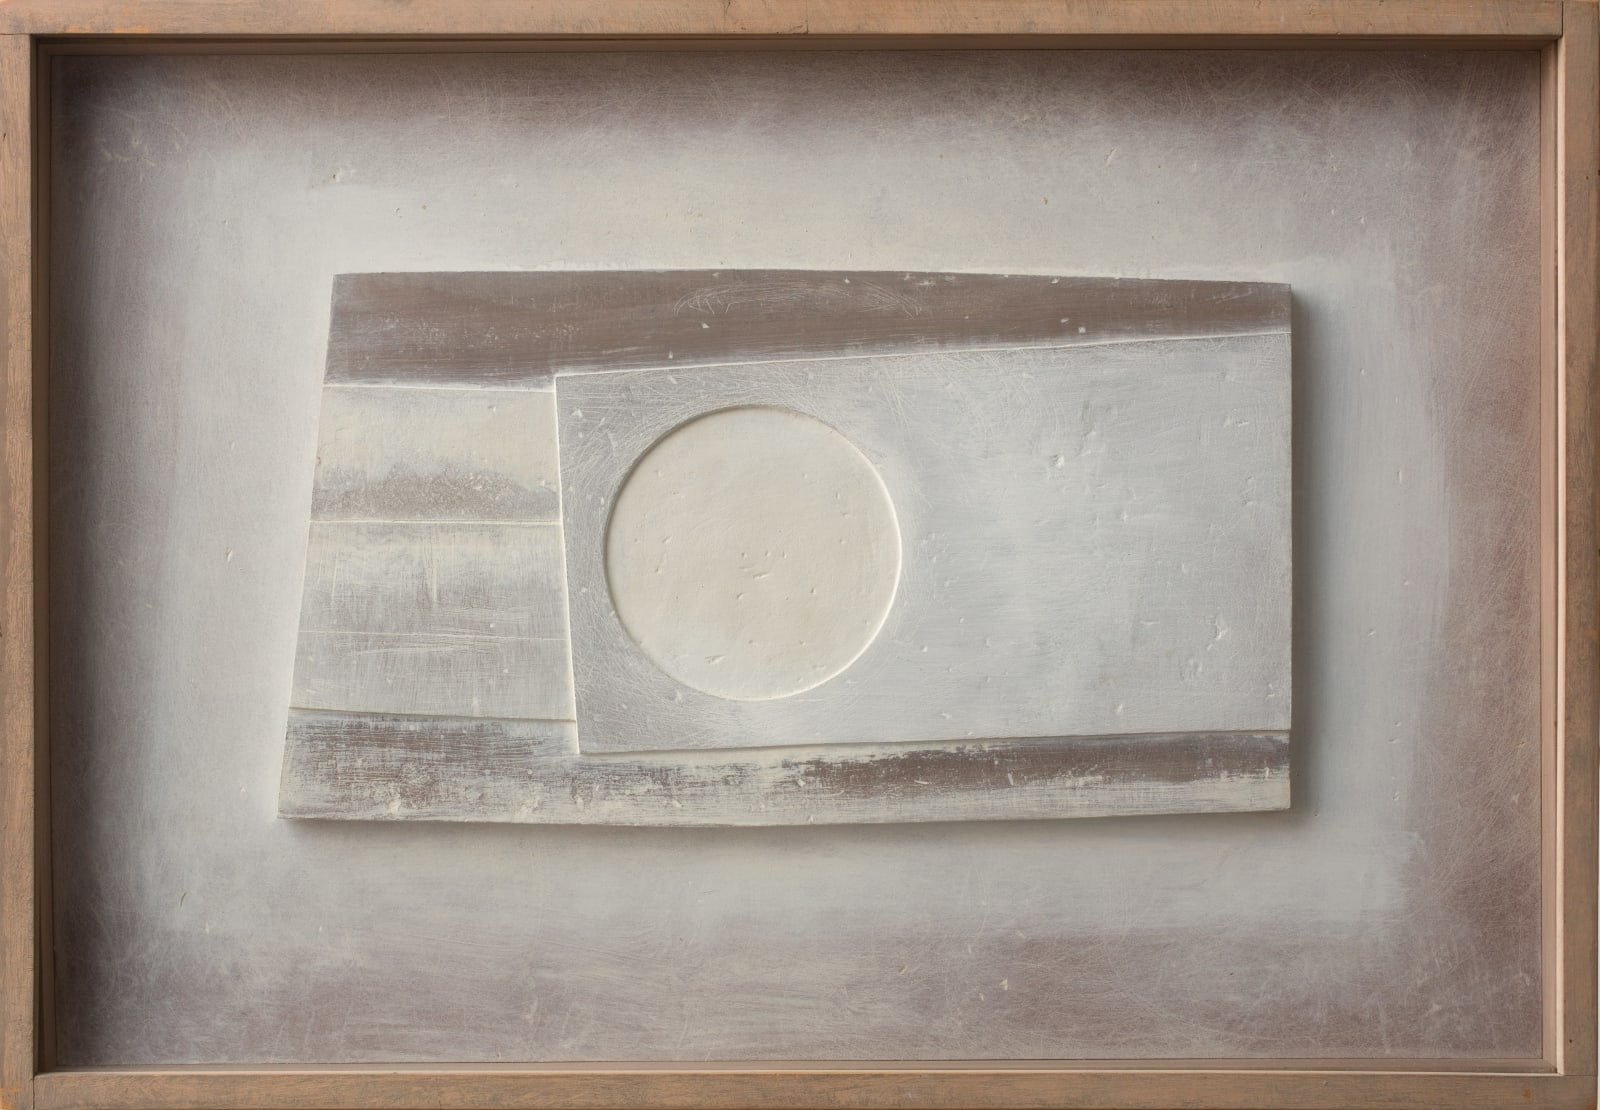 Ben Nicholson, 1965 (Kos - project for free-standing relief wall), 1965